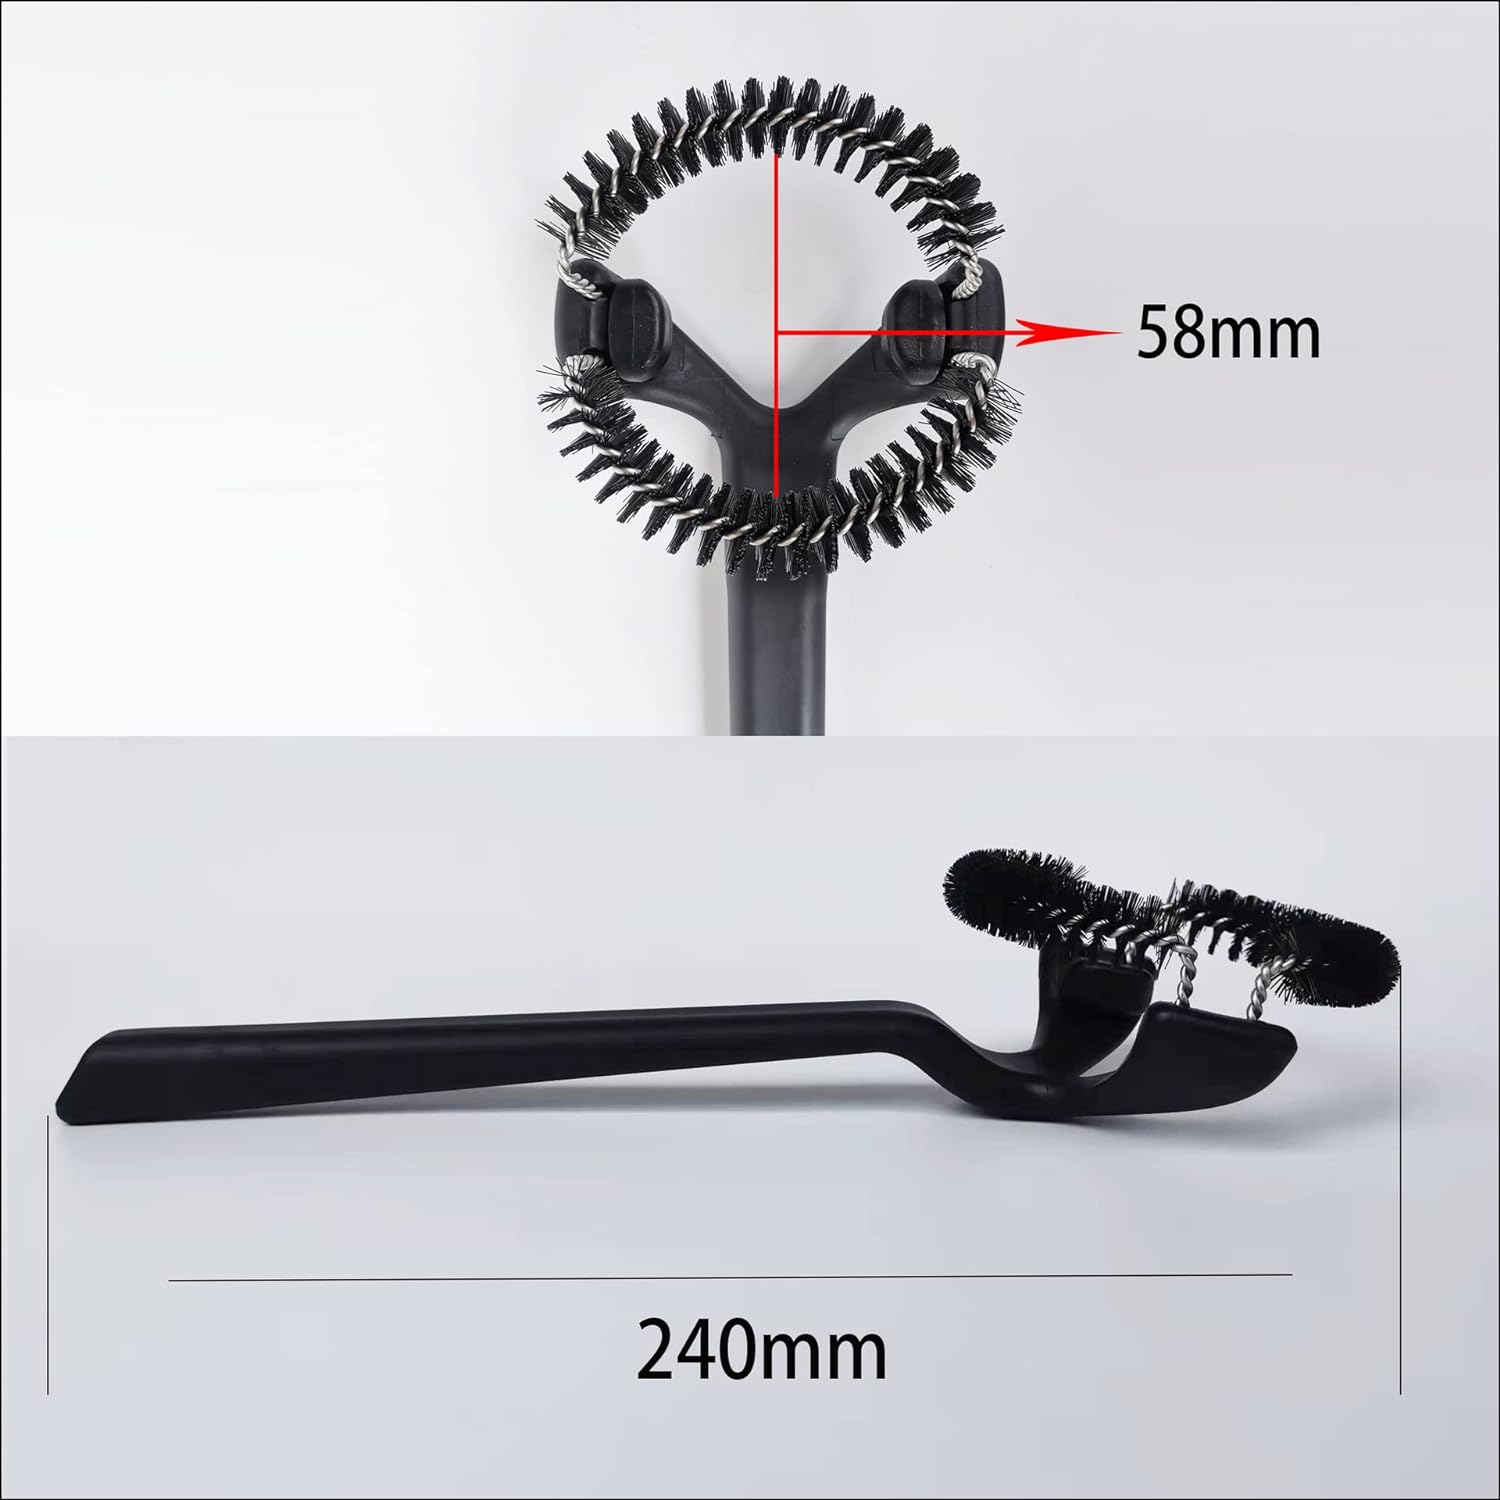 Meiwlong 58mm Coffee Machine Brush Cleaner Removable Nylon Bristles Group Head Round Barista Espresso Grinder Multifunction Cleaning Tools Home Kitchen Accessories